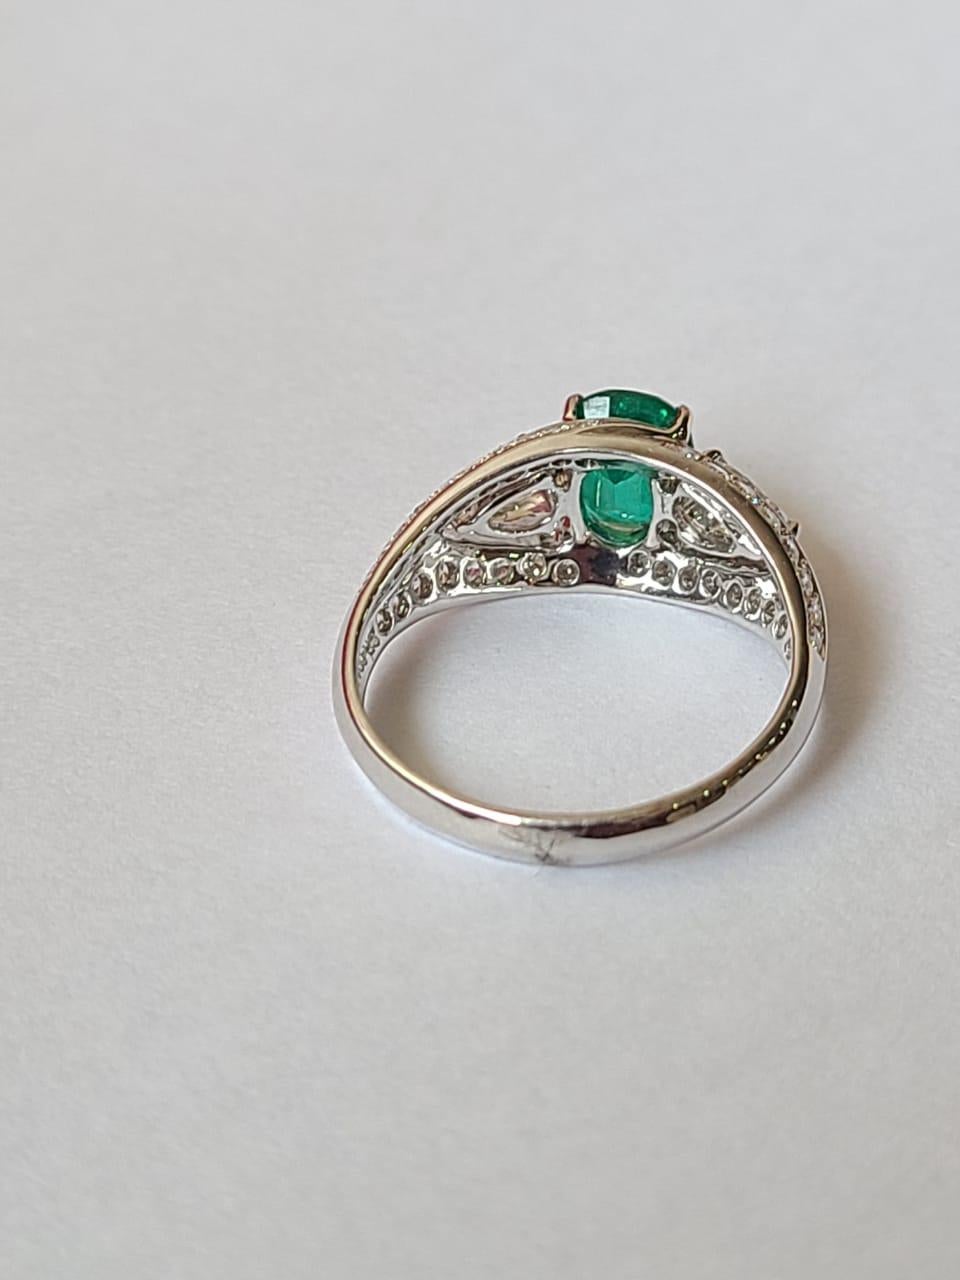 Emerald & Rose Cut Diamond Art Deco Style Engagement Ring Set in 18K Gold In New Condition For Sale In Hong Kong, HK